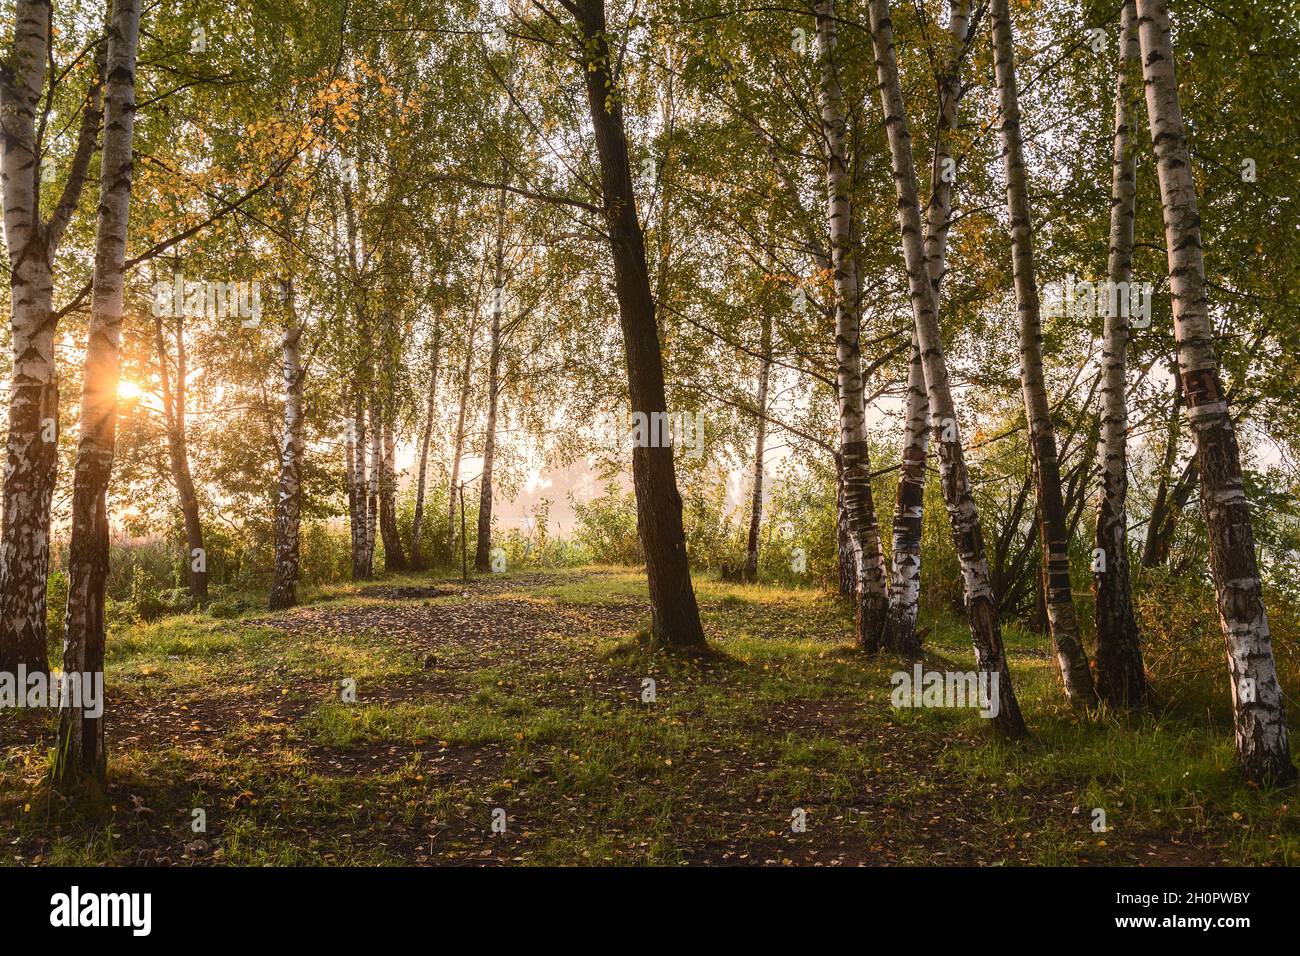 Backlit at the edge of a birch grove. Morning sun rays through the branches. Stock Photo